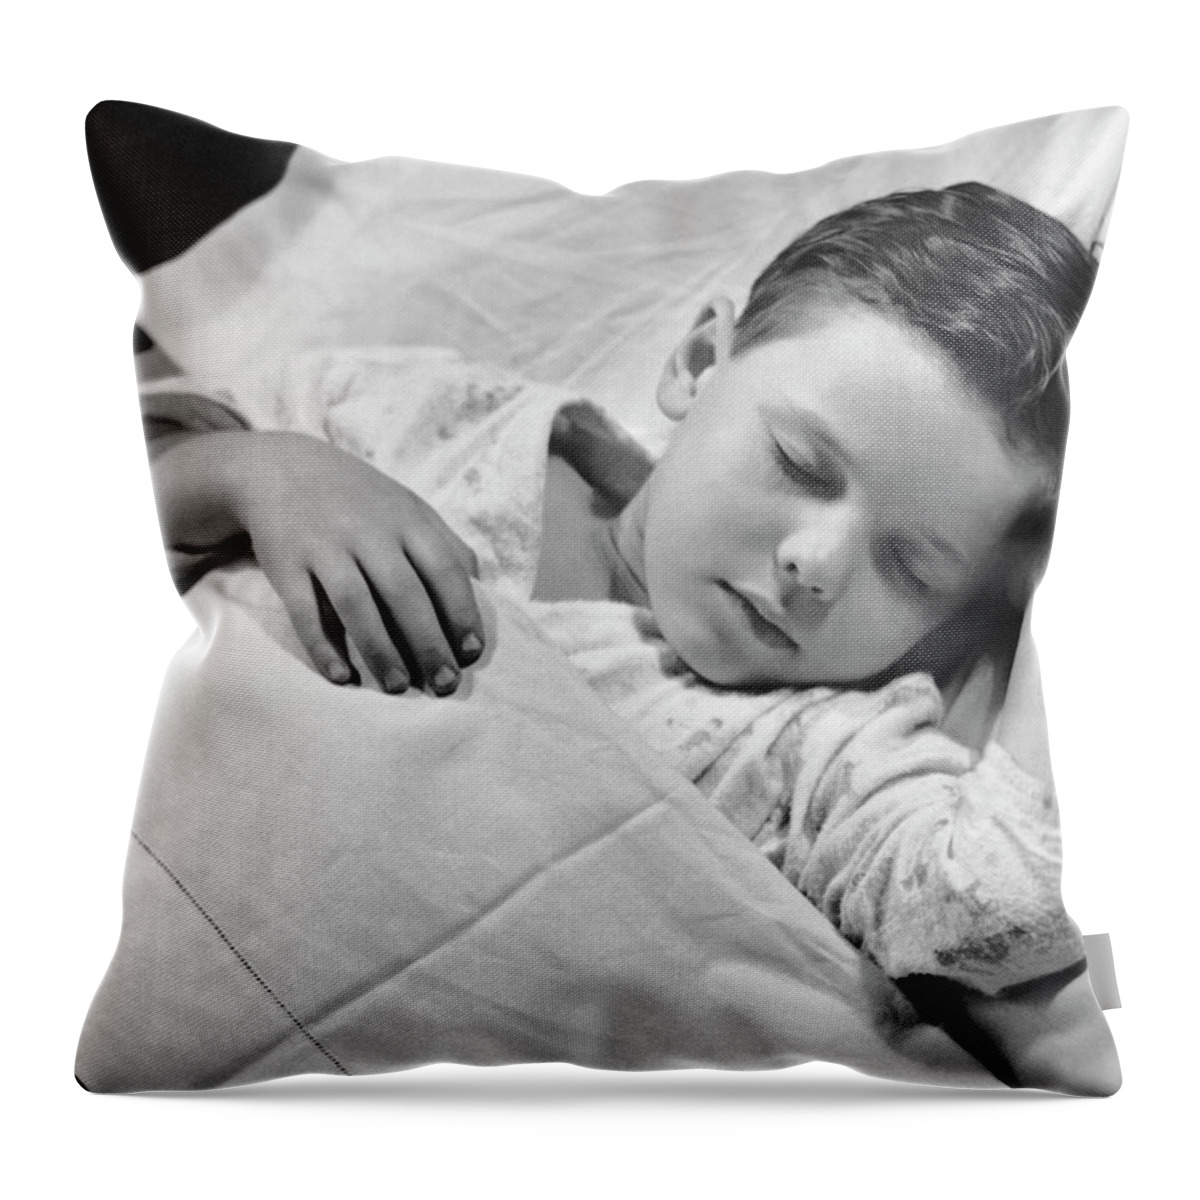 Child Throw Pillow featuring the photograph Young Boy Asleep In Bed by George Marks